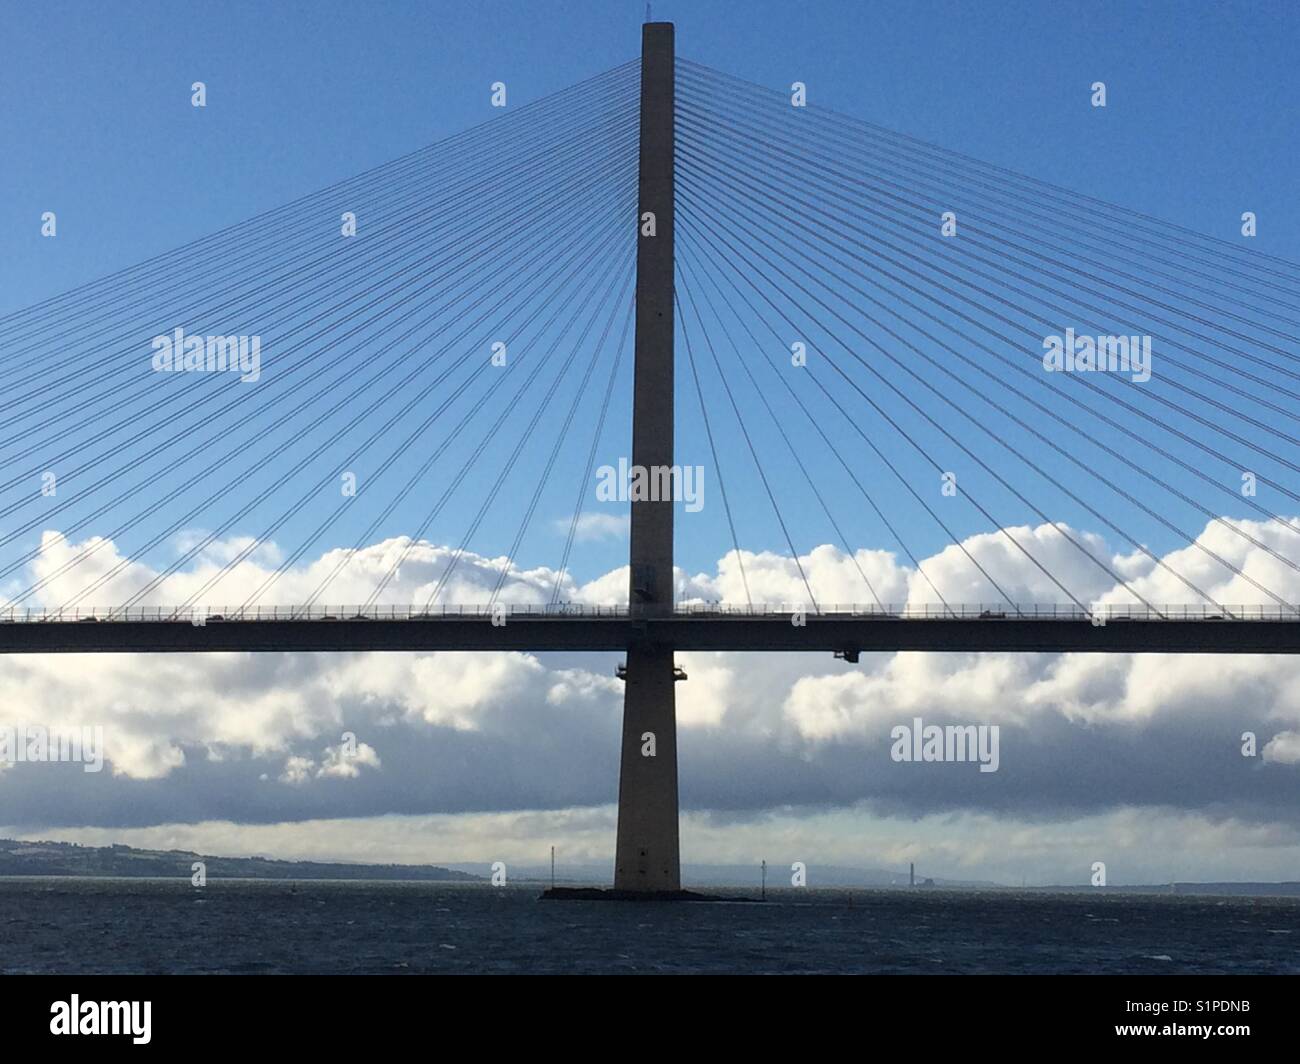 Queensferry crossing, Firth of Forth, Édimbourg, Écosse. Banque D'Images